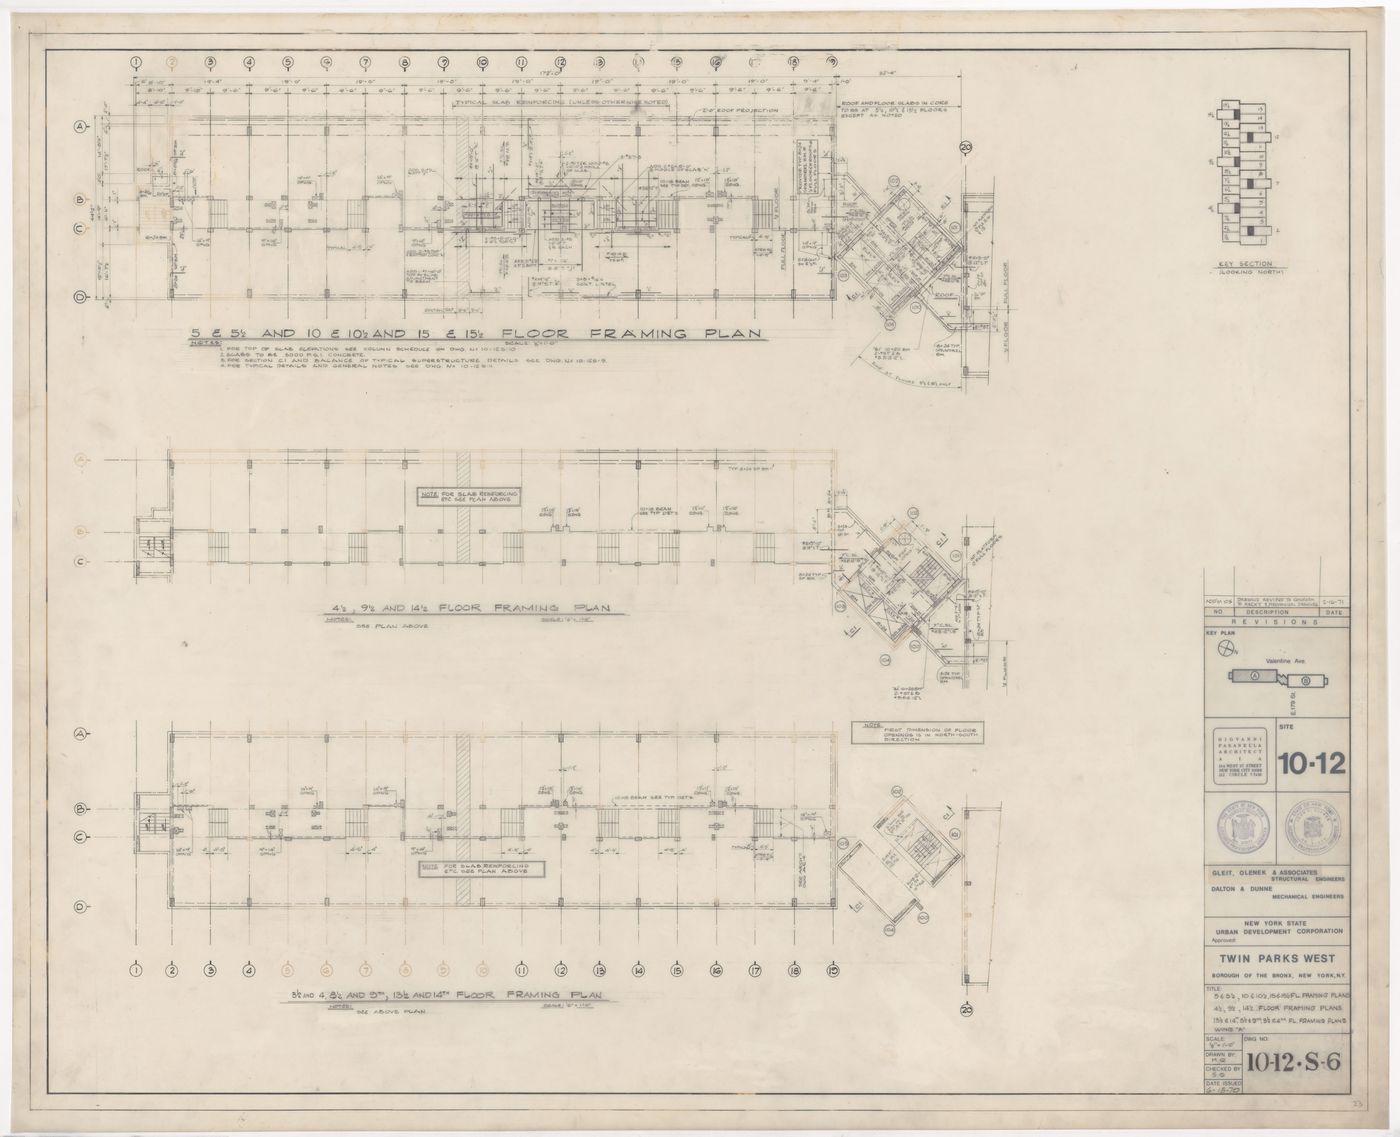 Framing plans for Twin Parks West, Site 10-12, Bronx, New York